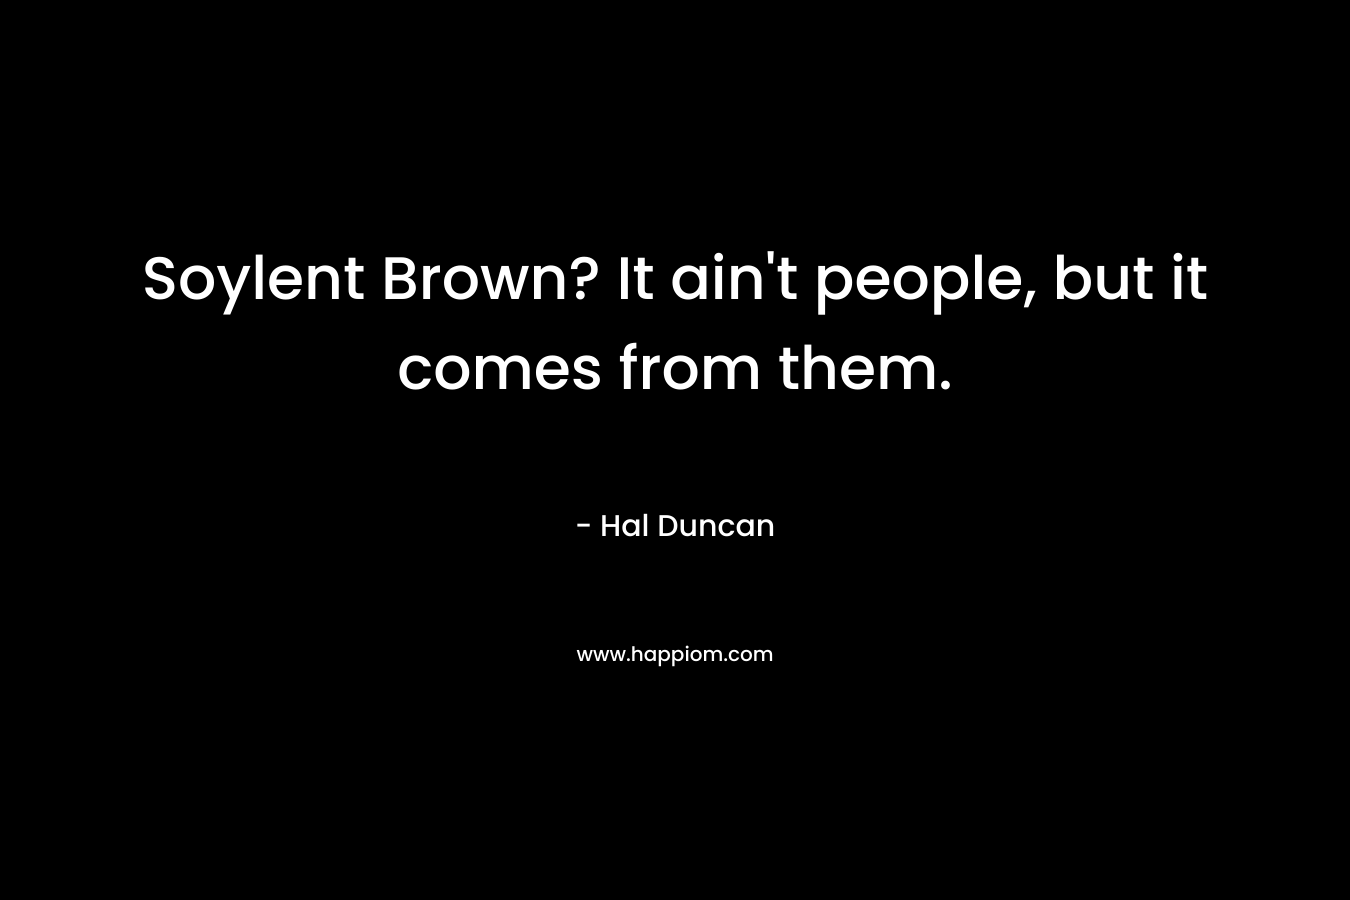 Soylent Brown? It ain't people, but it comes from them.